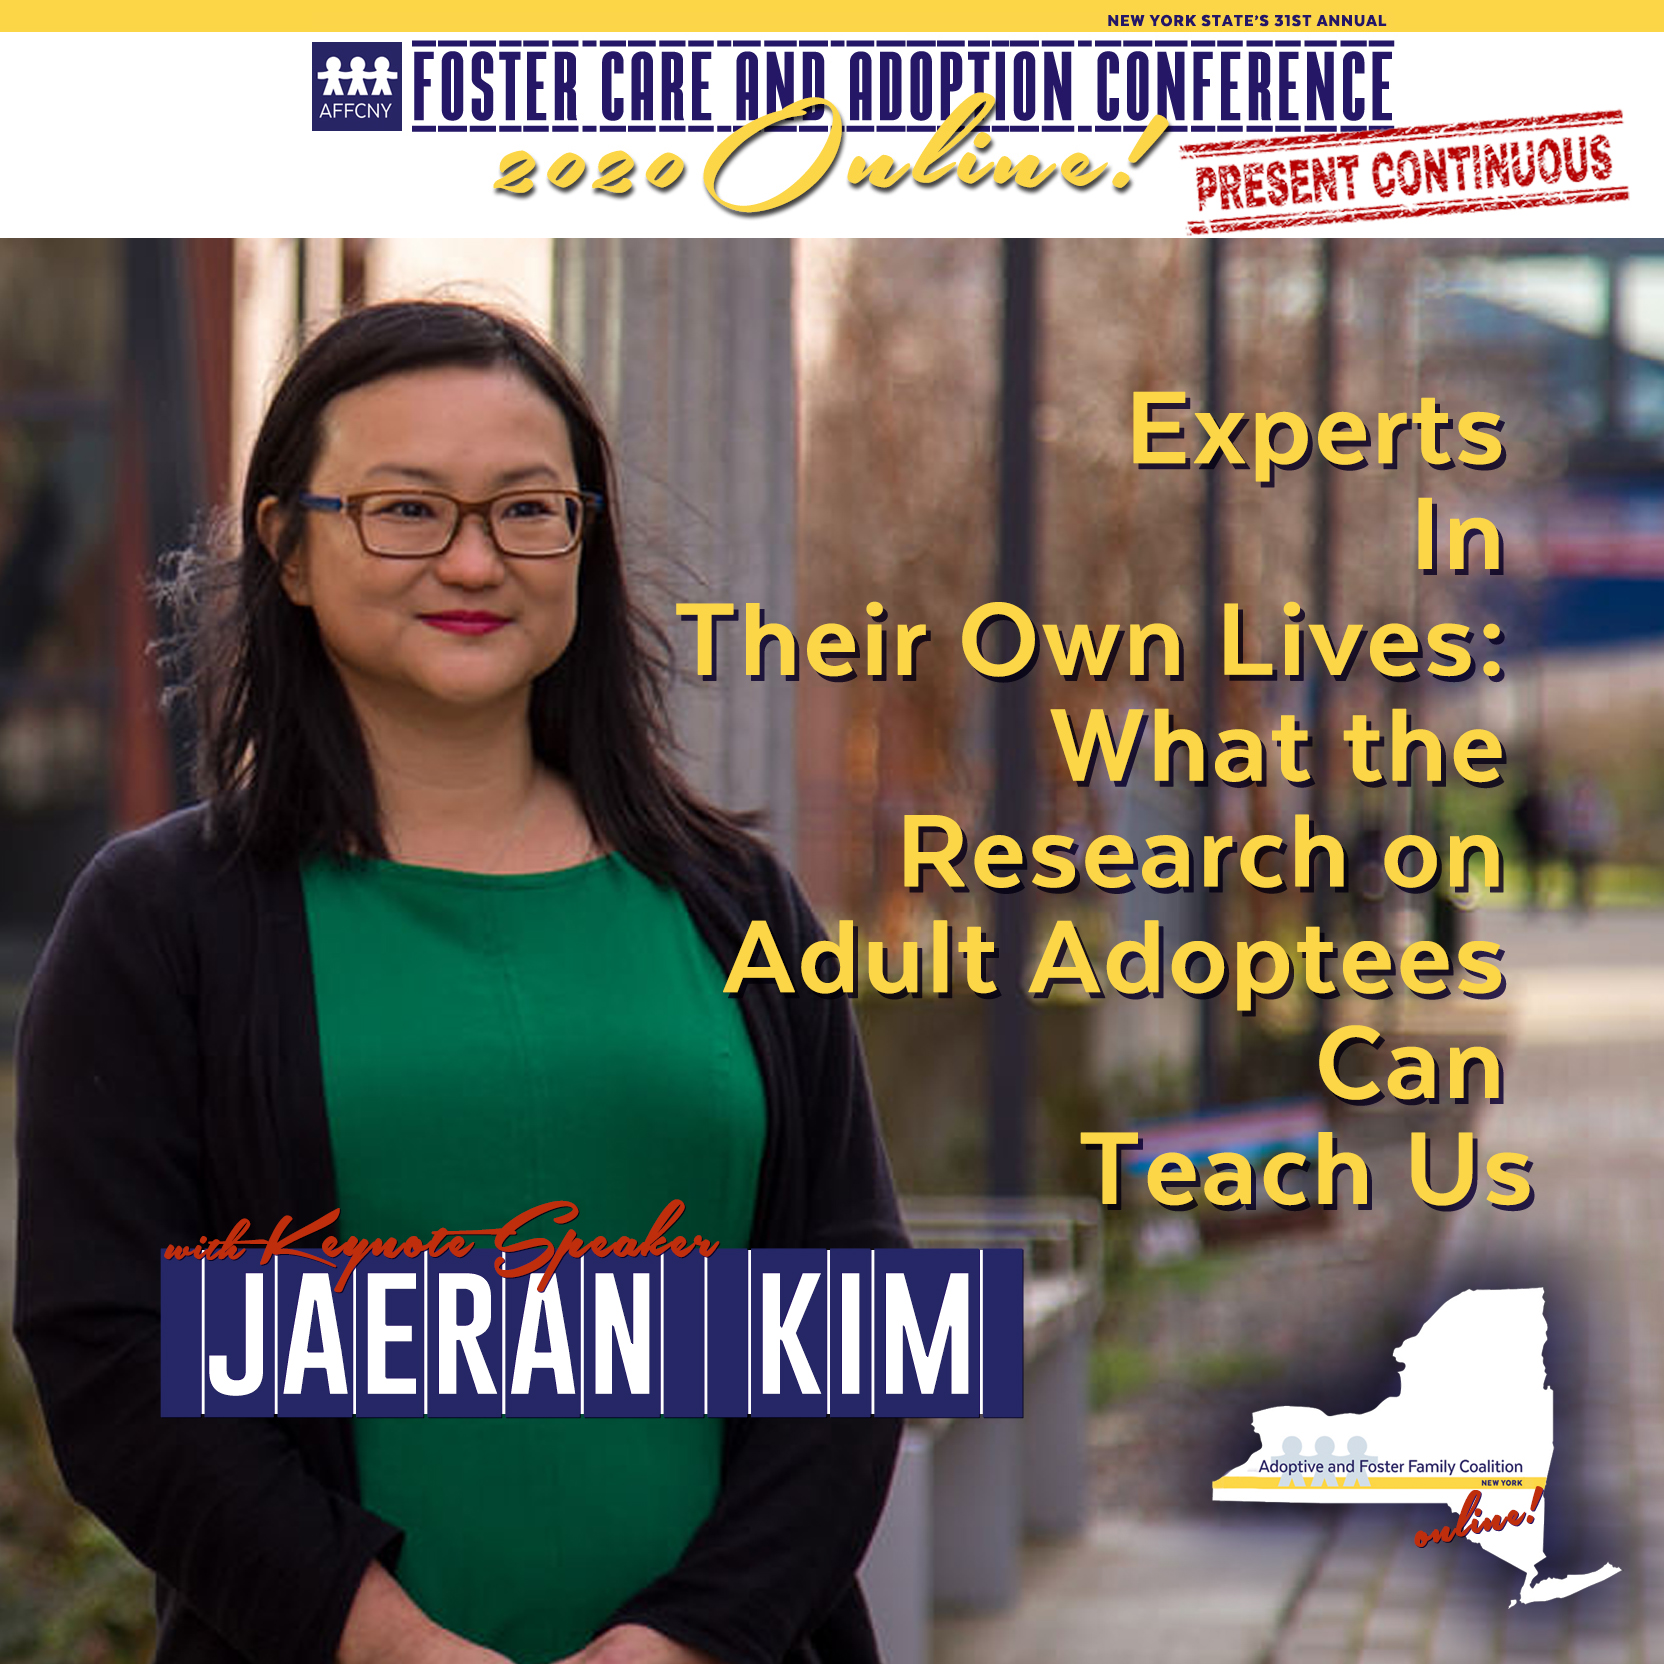 JaeRan Kim will present “Experts In Their Own Lives: What the Research on Adult Adoptees Can Teach Us“